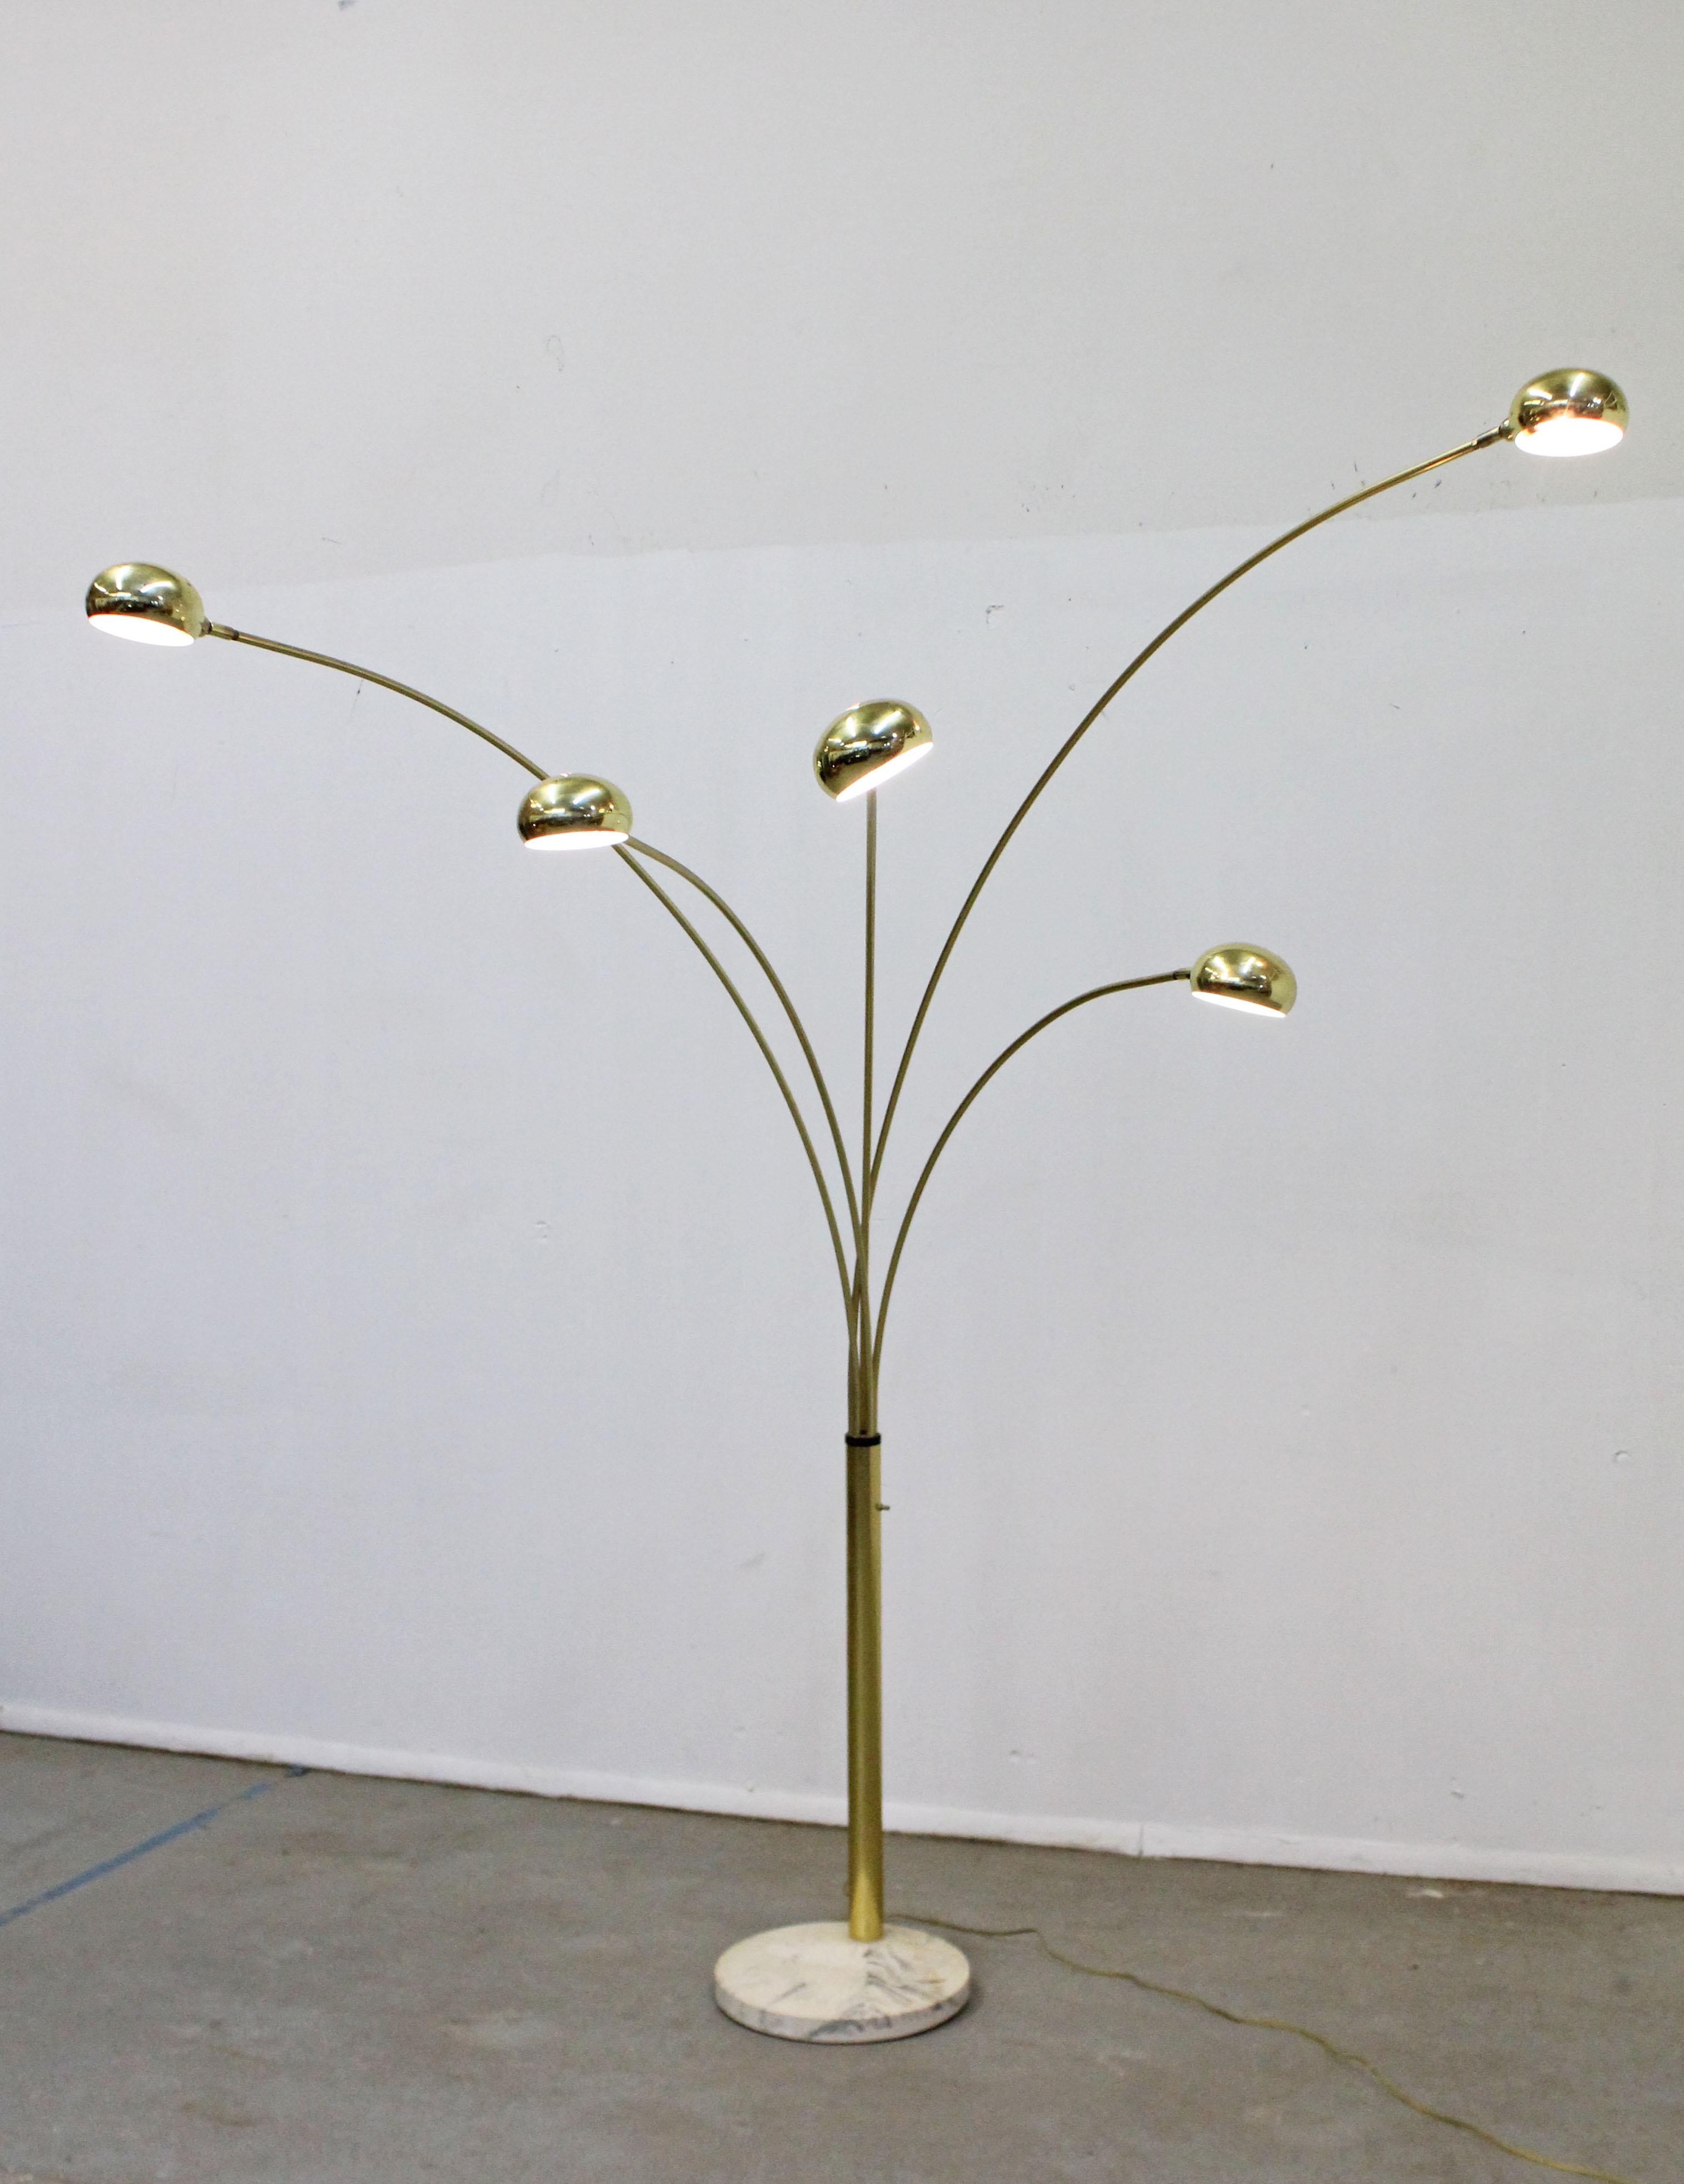 Offered is a super unique, vintage Italian brass and marble floor lamp.  Features a marble base with 5 arc-shaped brass swiveling rods and 5 bulbs that pivot. The heads swivel from left to right and the pivot. The arms swivel about 180 degrees, not